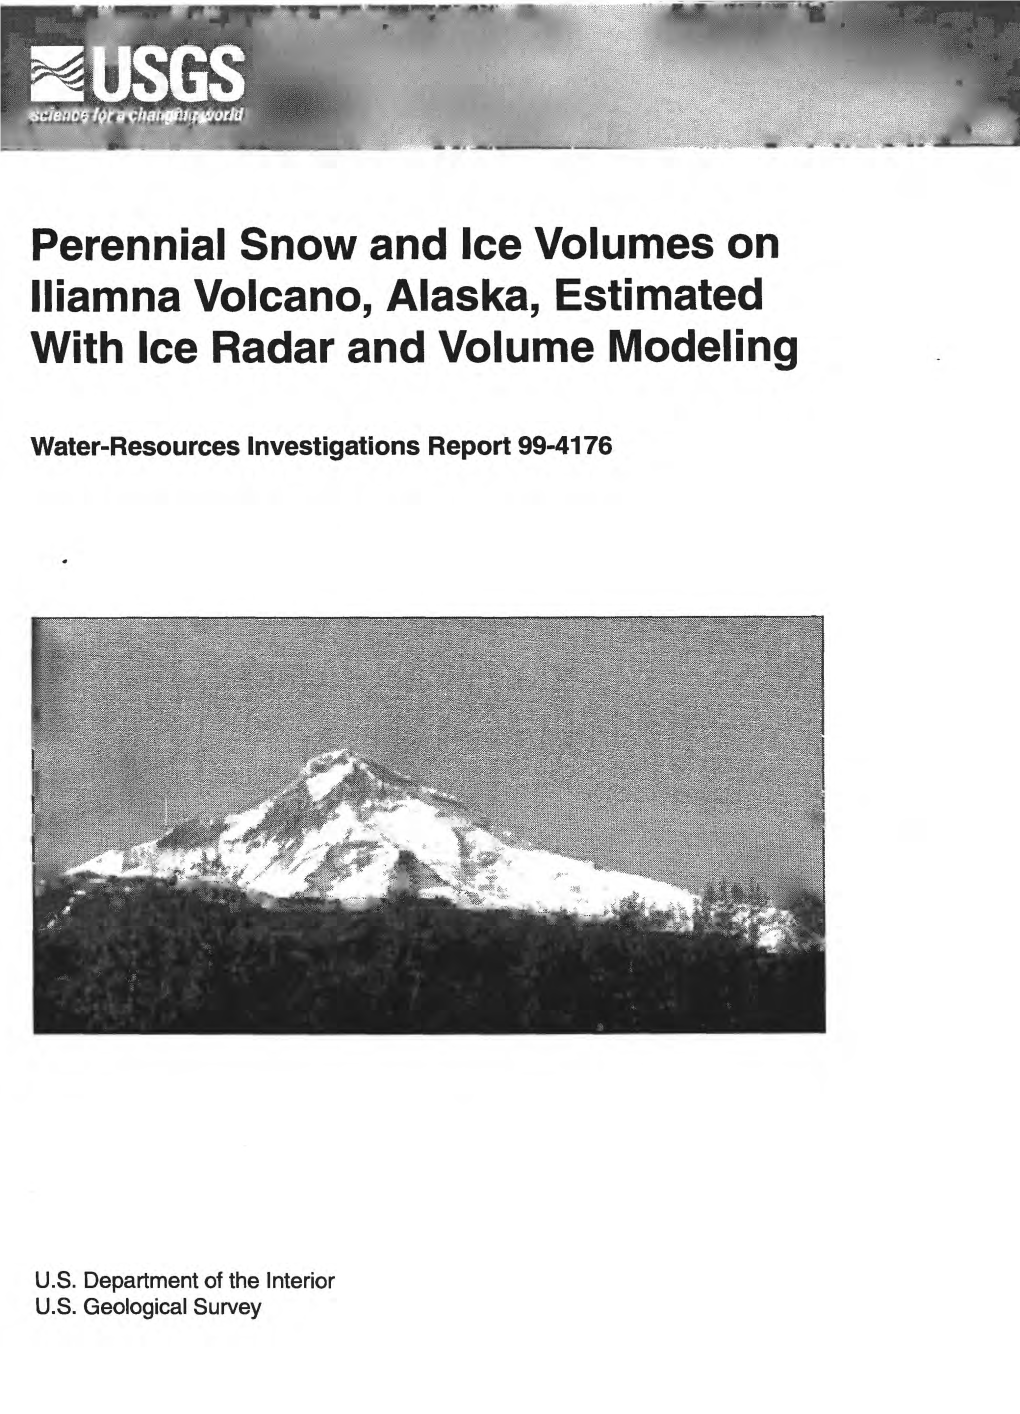 Perennial Snow and Ice Volumes on Iliamna Volcano, Alaska, Estimated with Ice Radar and Volume Modeling